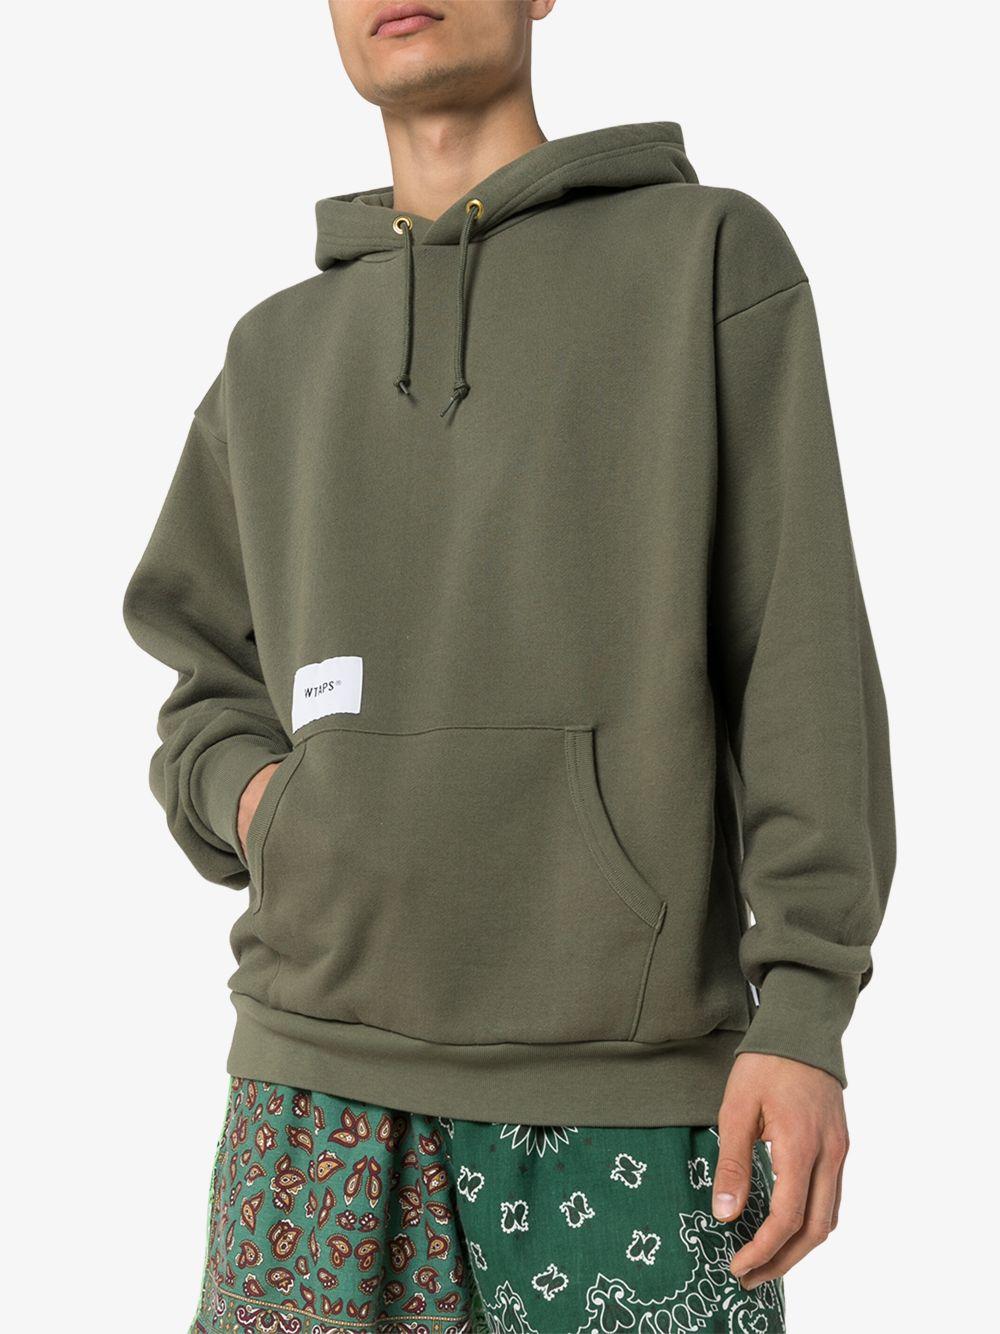 WTAPS Academy Print Hoodie in Green for Men - Lyst